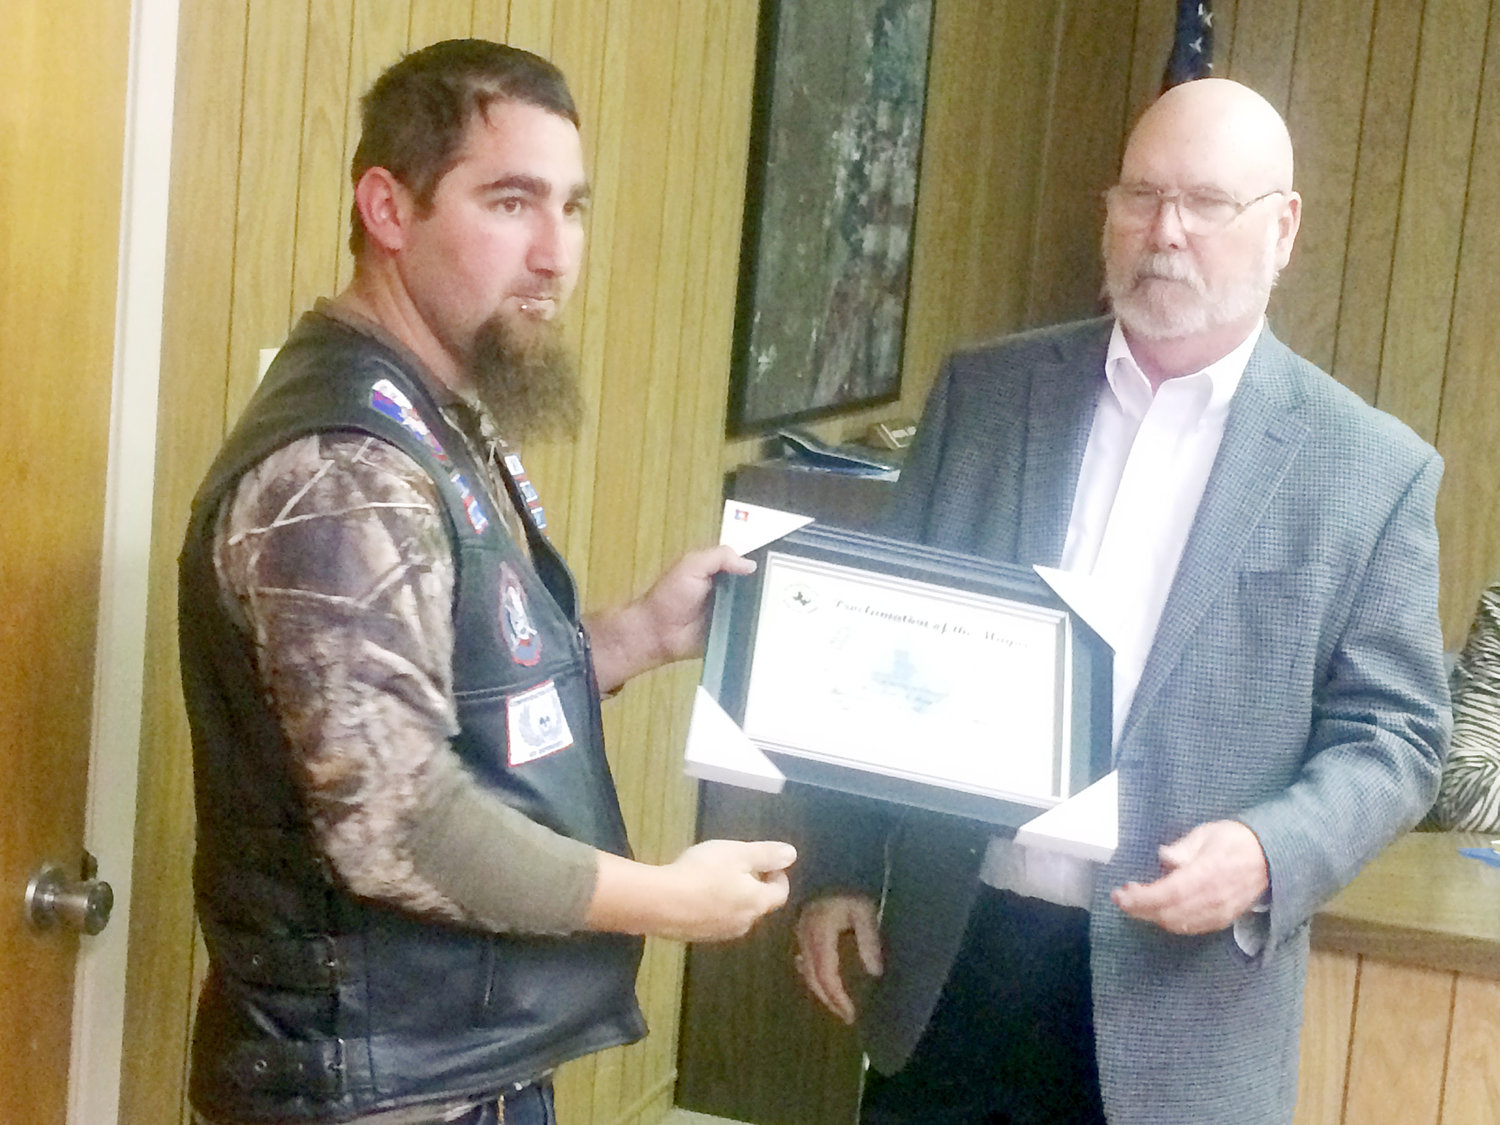 Quitman Mayor J.R. Evans (right) gives Steven Edwards (left) of Highway Masters Riding Club a proclamation honoring this upcoming May as Motorcycle Safety and Awareness Month.